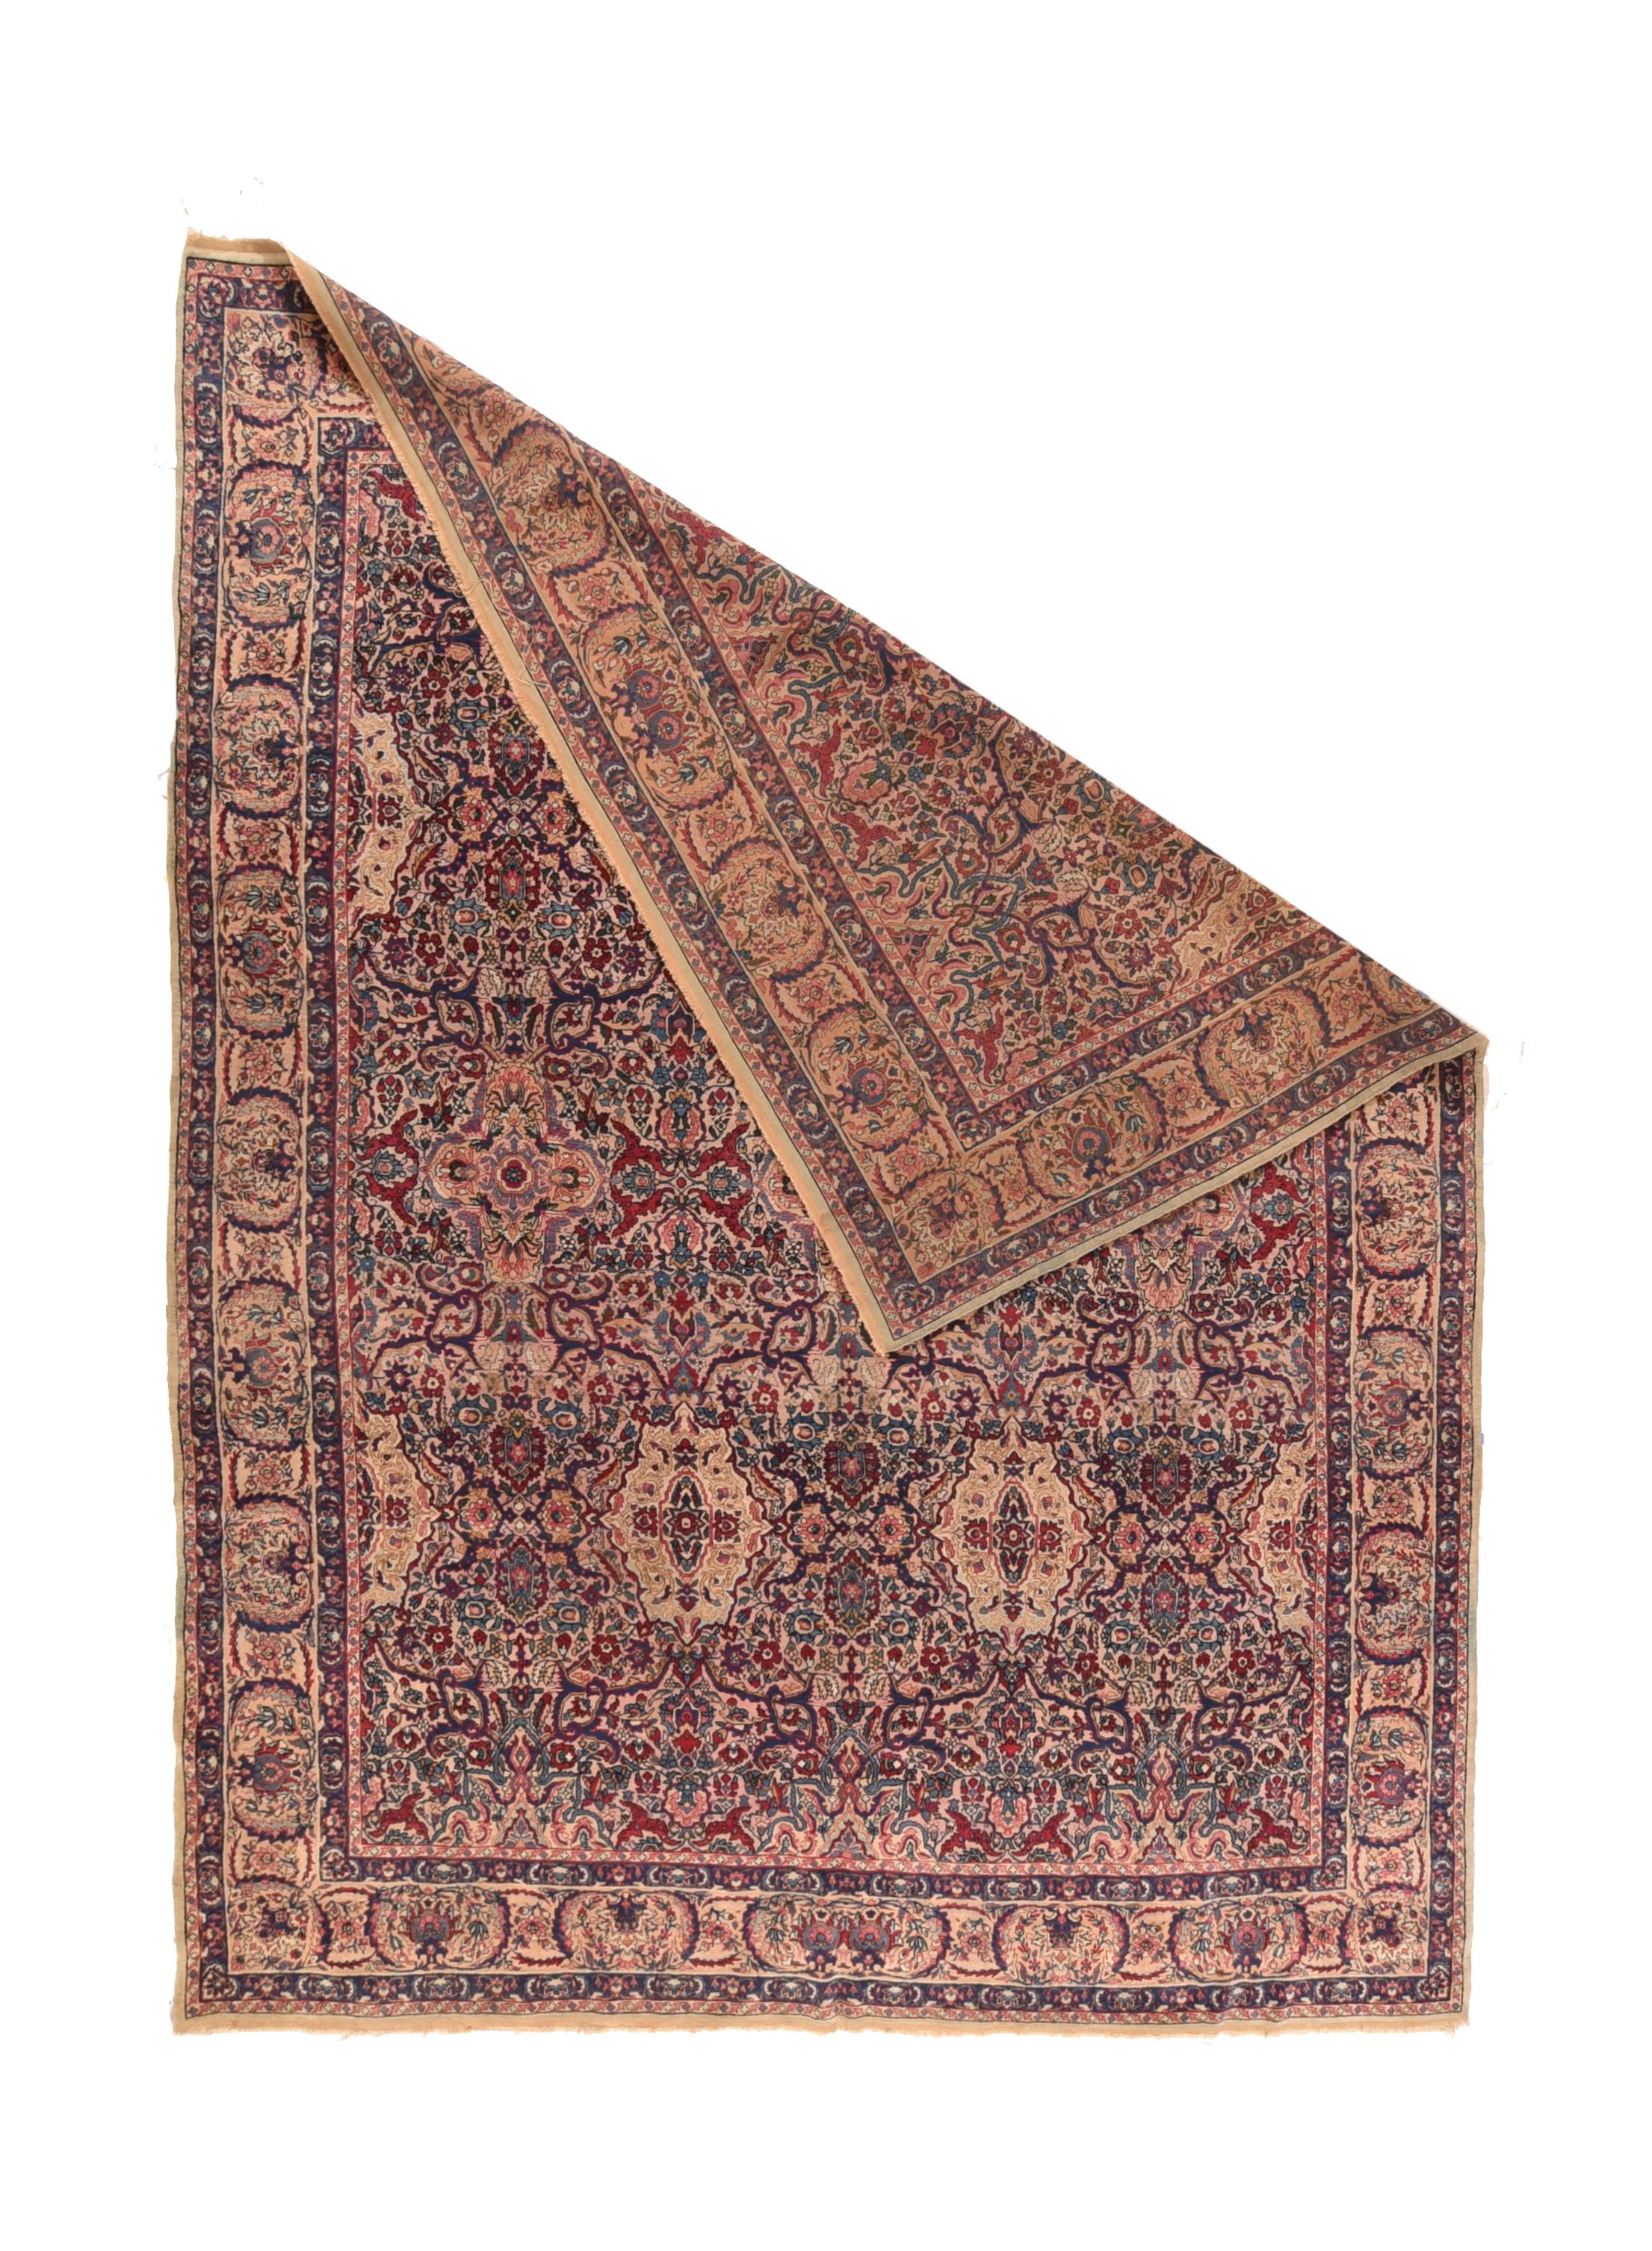 Antique Lavar Kerman Rug 8'11'' x 11'11'' In Excellent Condition For Sale In New York, NY